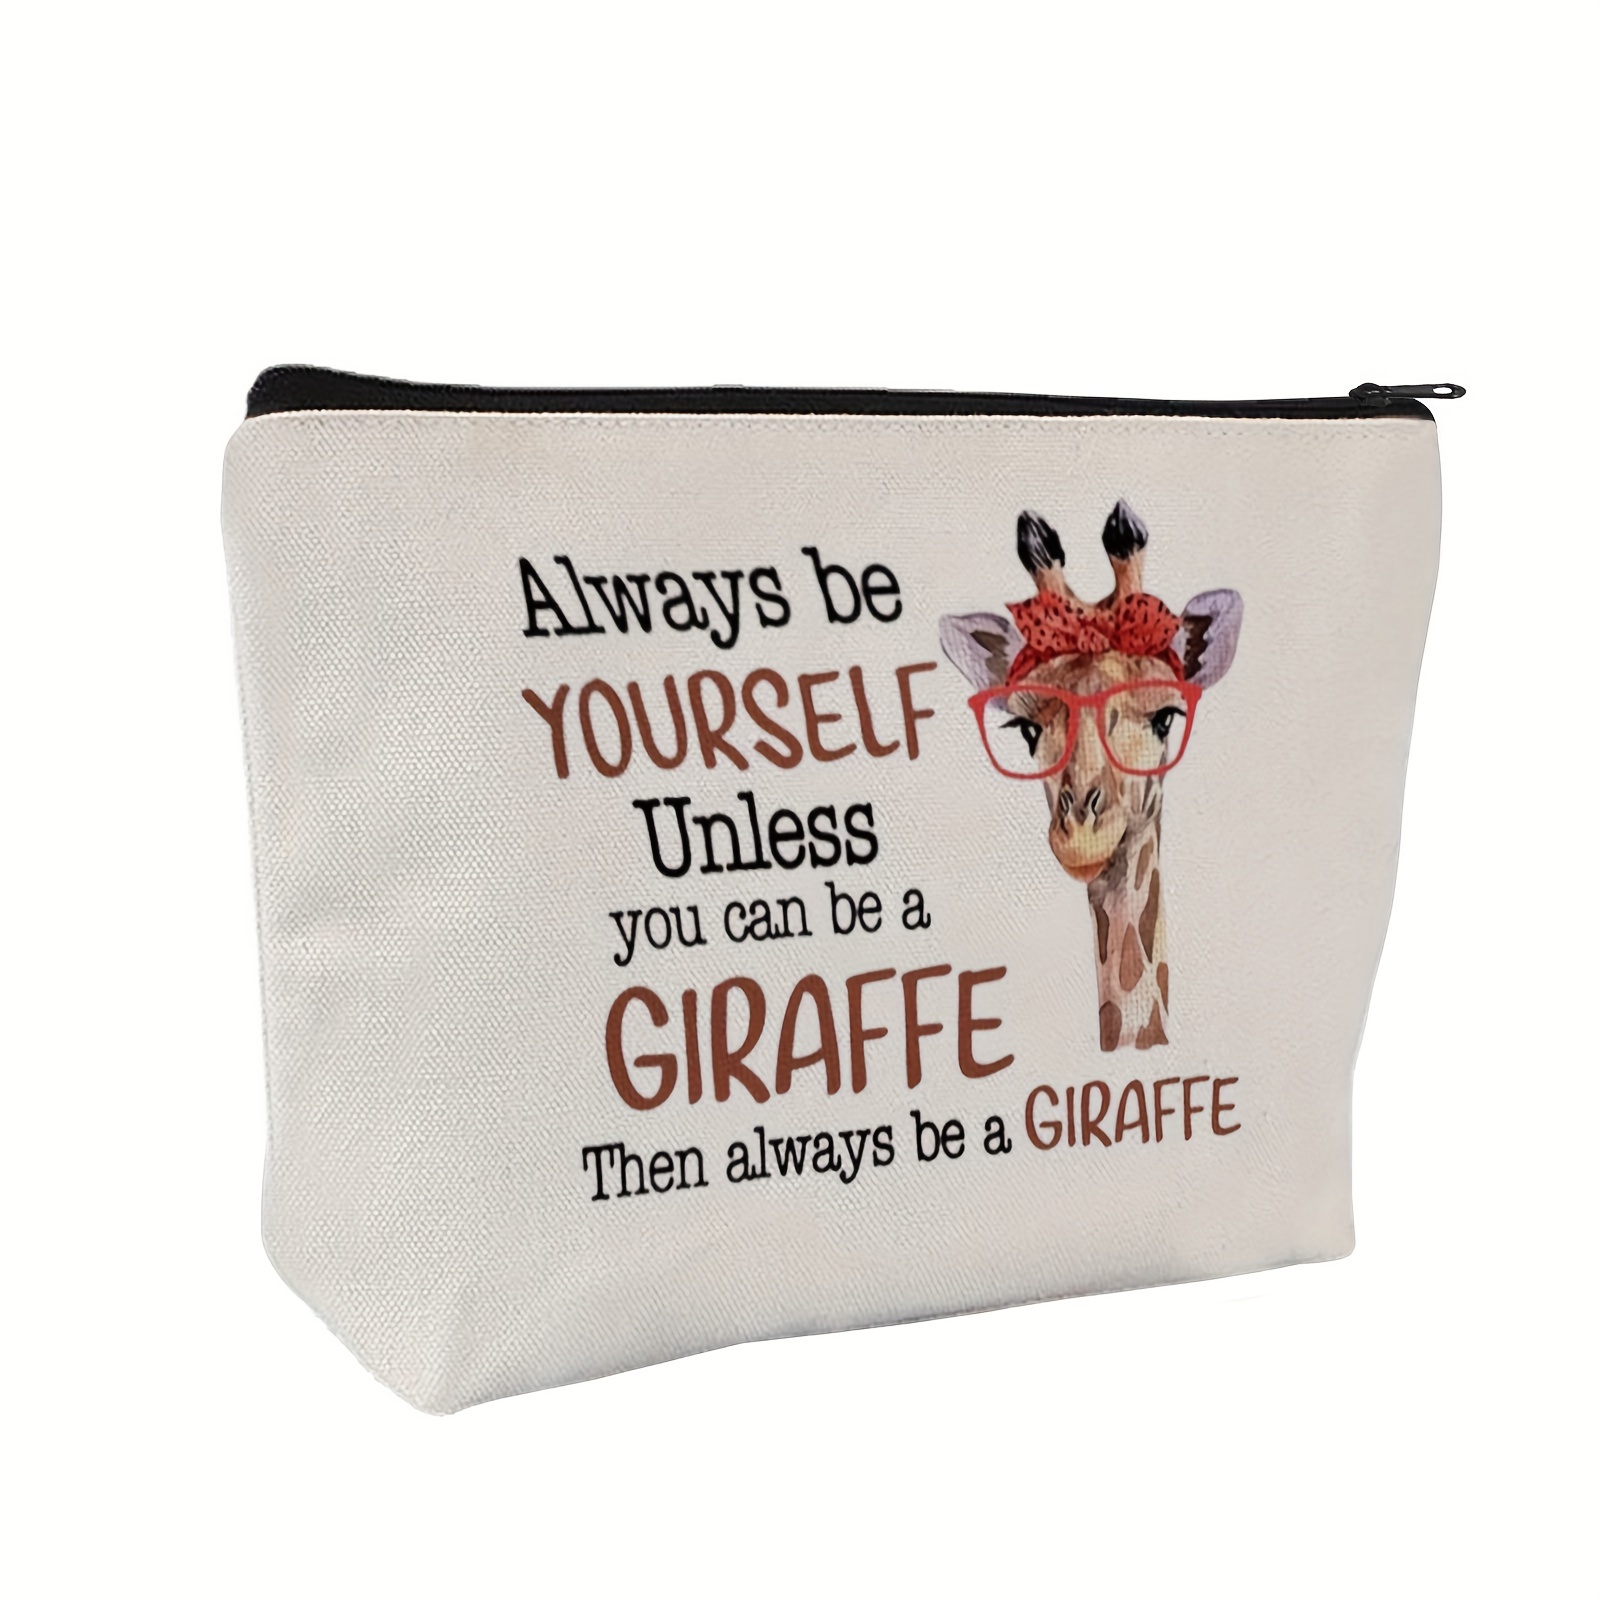 

Always Be Yourself Unless You Can Be A Giraffe Then Always Be A Giraffe-funny Giraffe Gifts For Women, Roomy Makeup Bags With Zipper Toiletry Bag Pouch Travel Packing Accessory Organizer Gifts.